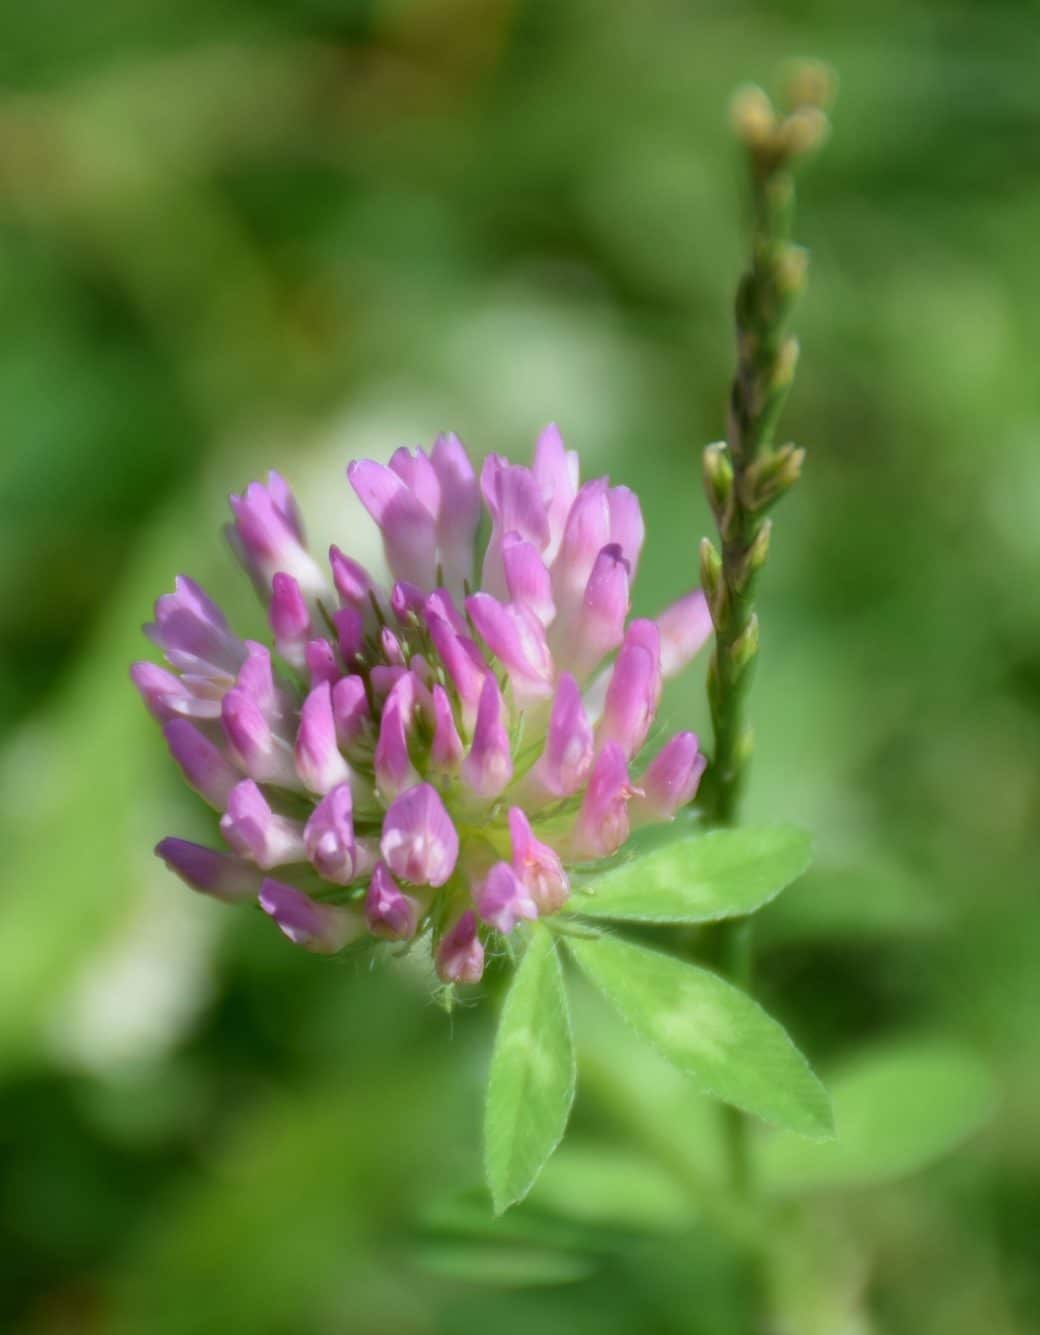 Picture: The photo shows a close-up of a pink flower of meadow clover, Latin Trifolium pratense, in the sun.